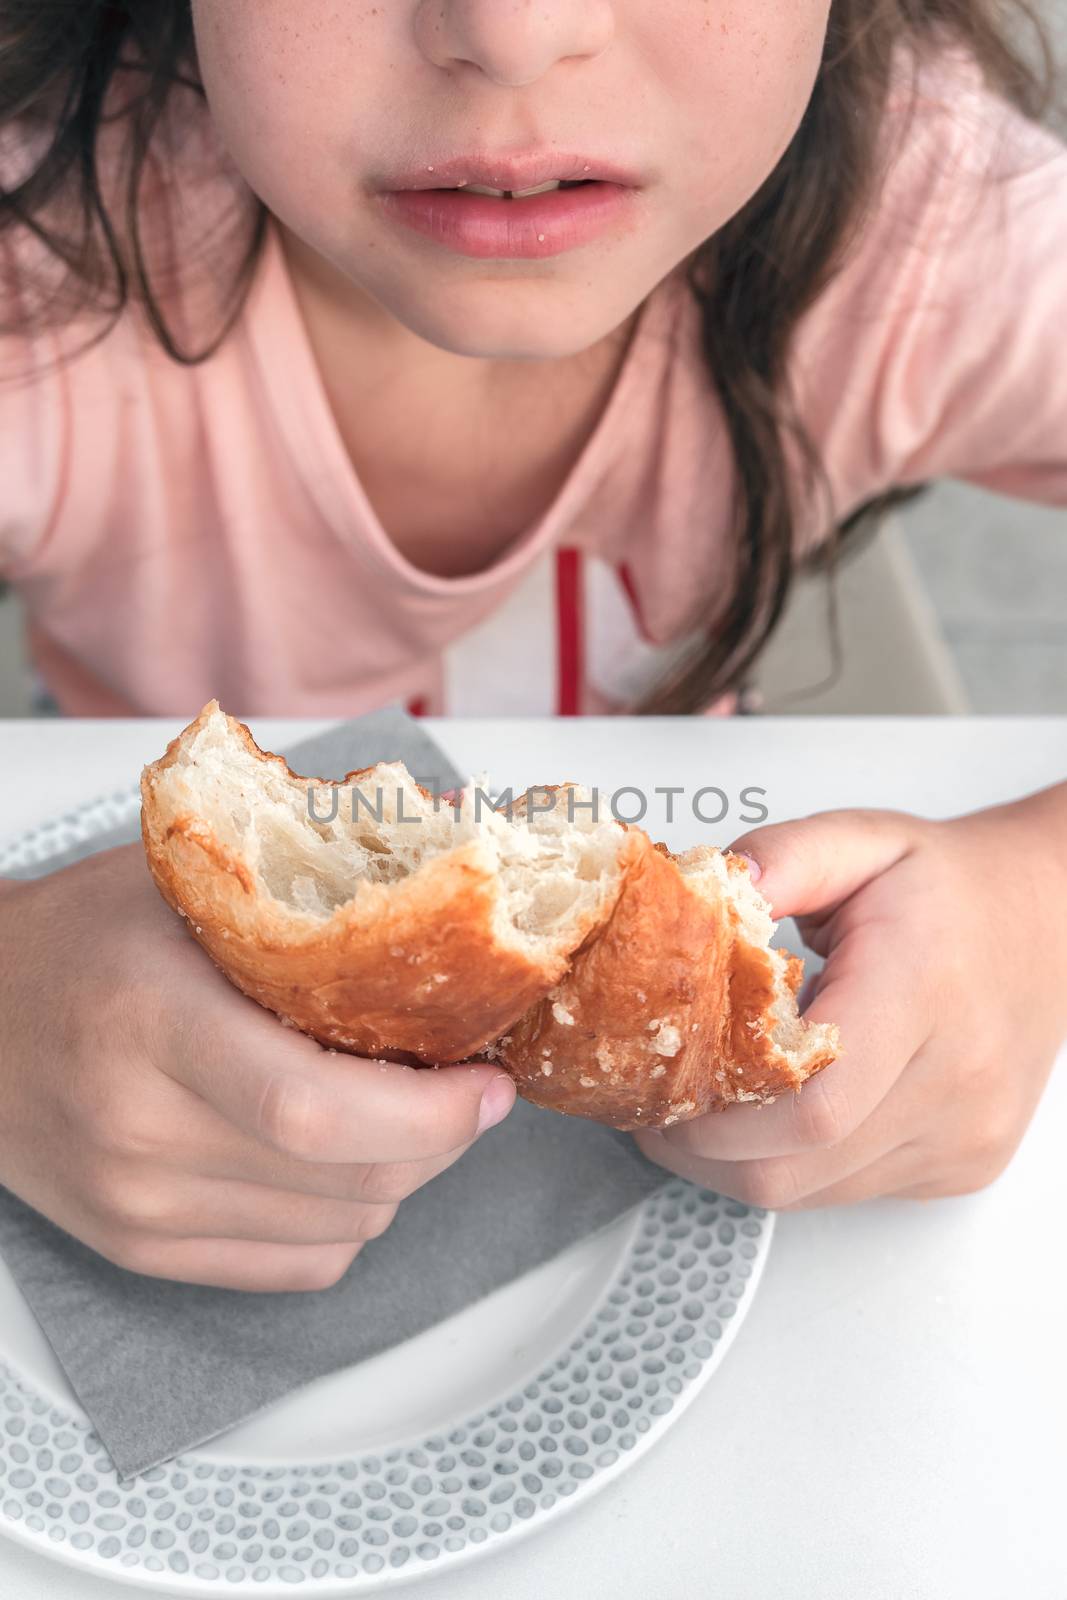 Pretty little girl eats a fresh croissant for breakfast. Portrait of cute girl with yummy face enjoy eating croissant. Healthy food for children concept.